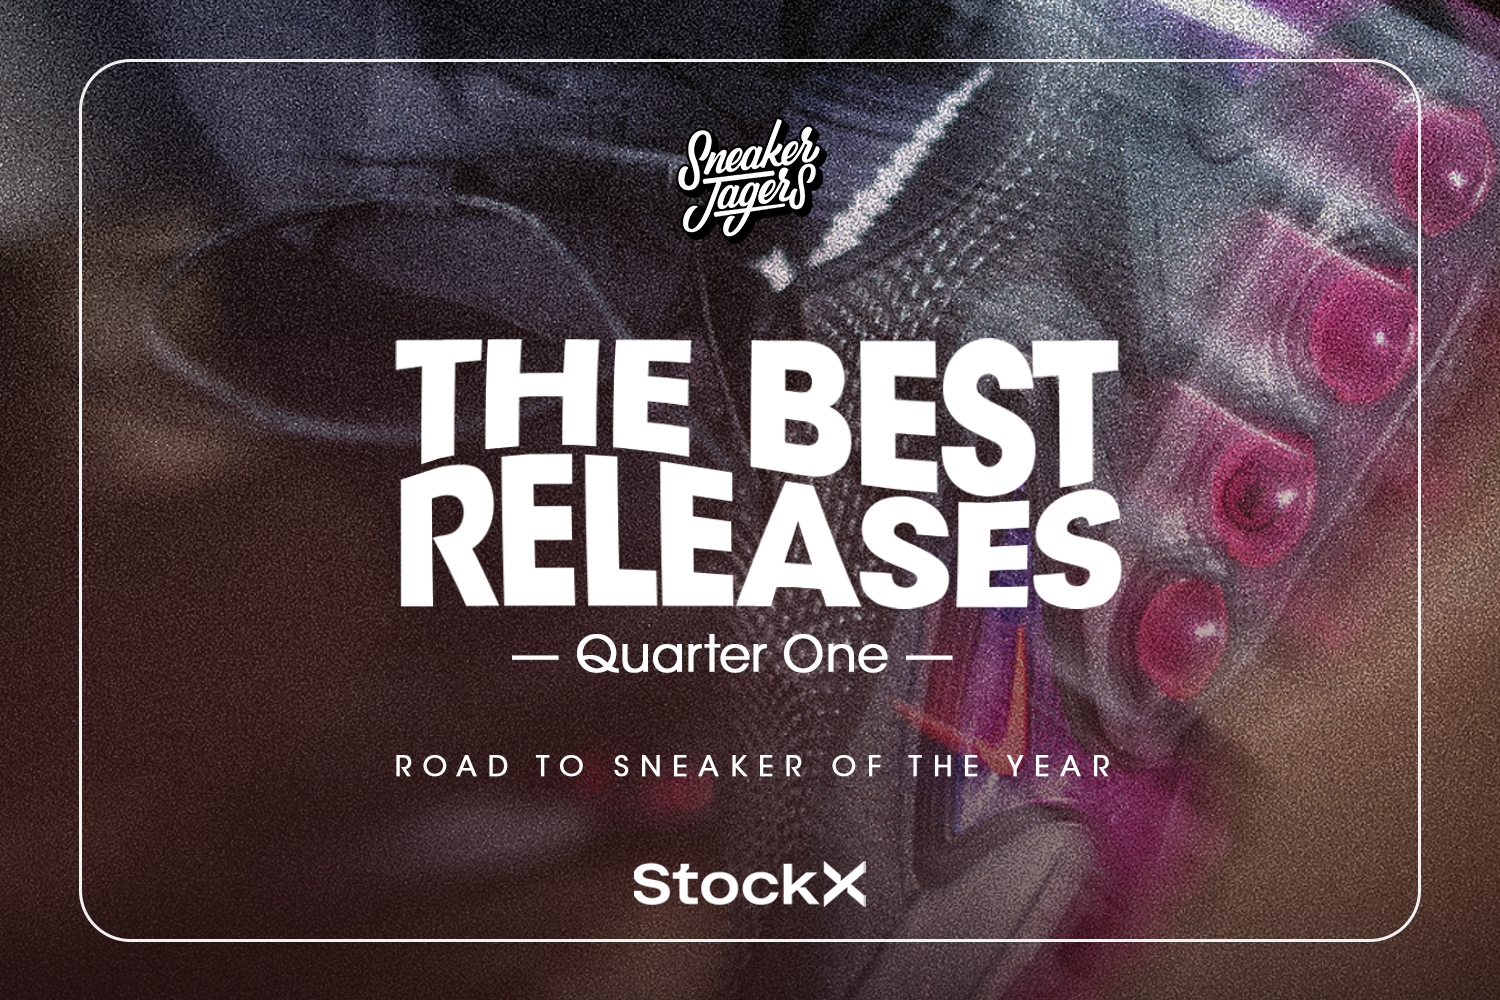 Sneakerjagers Road to Sneaker of the Year giveaway &#8211; Top 3 releases